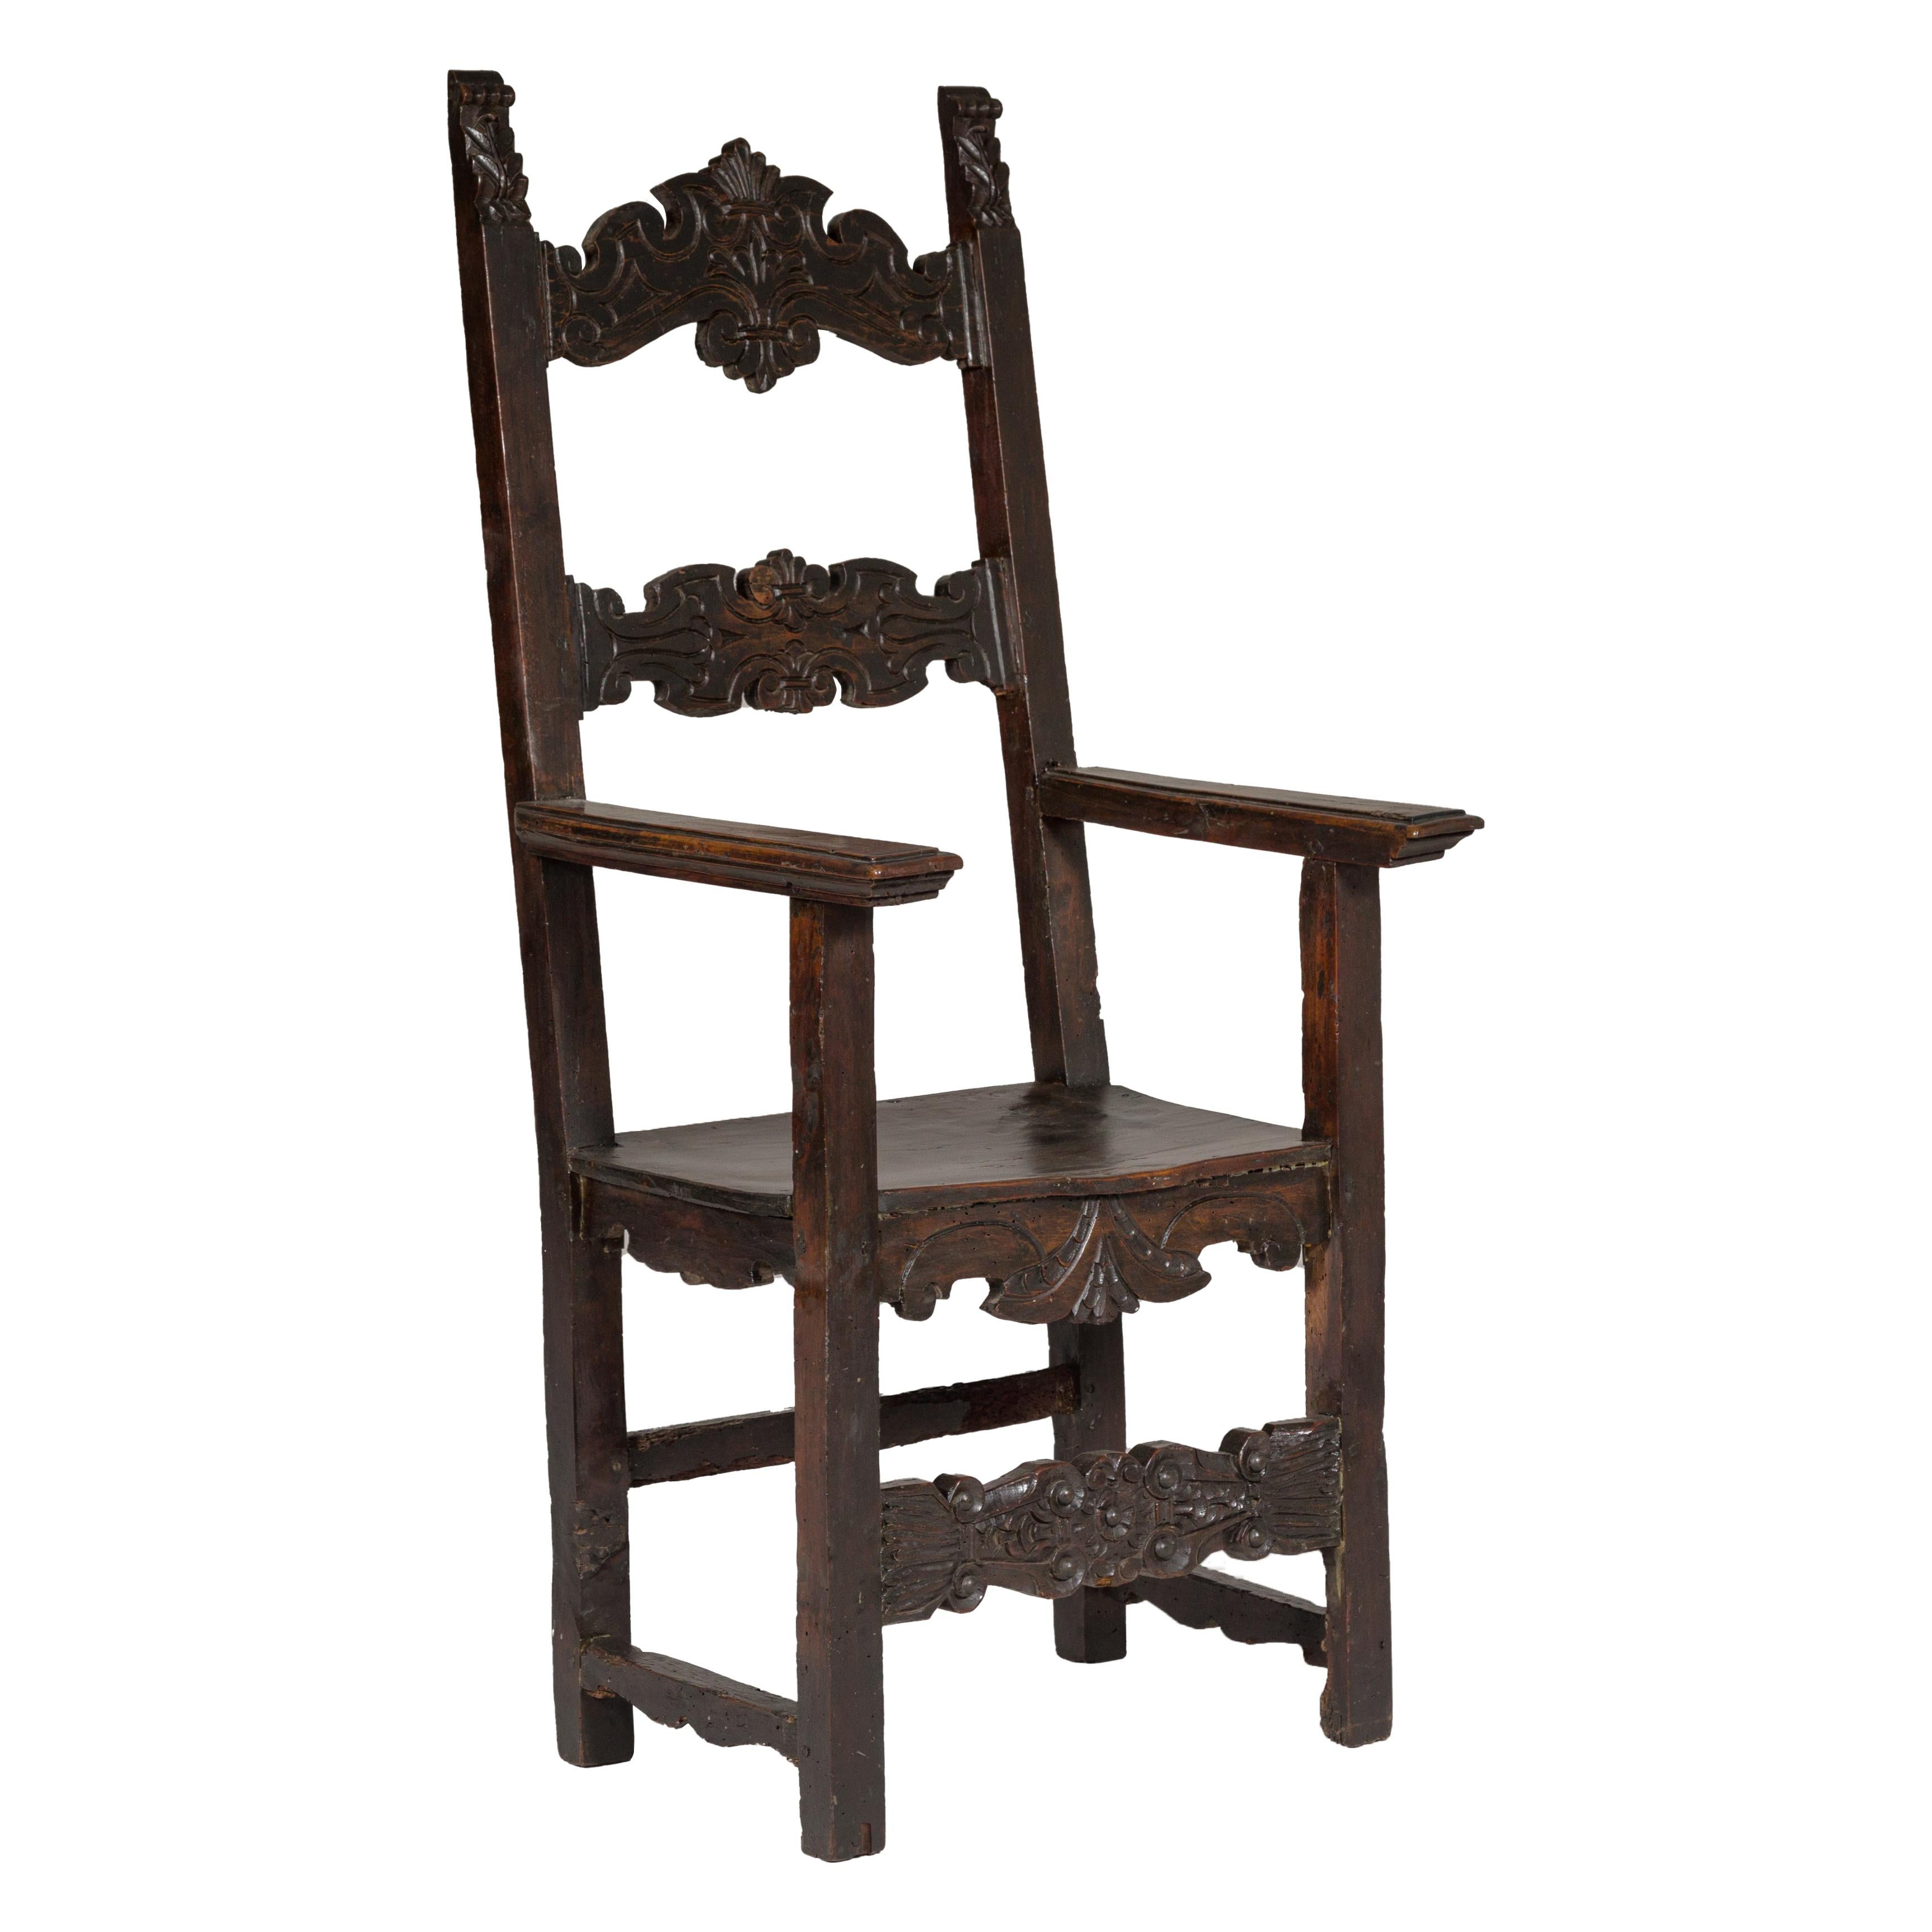 Antique High Back Wooden Throne Chair with Richly Hand-Carved Back and Skirt For Sale 9